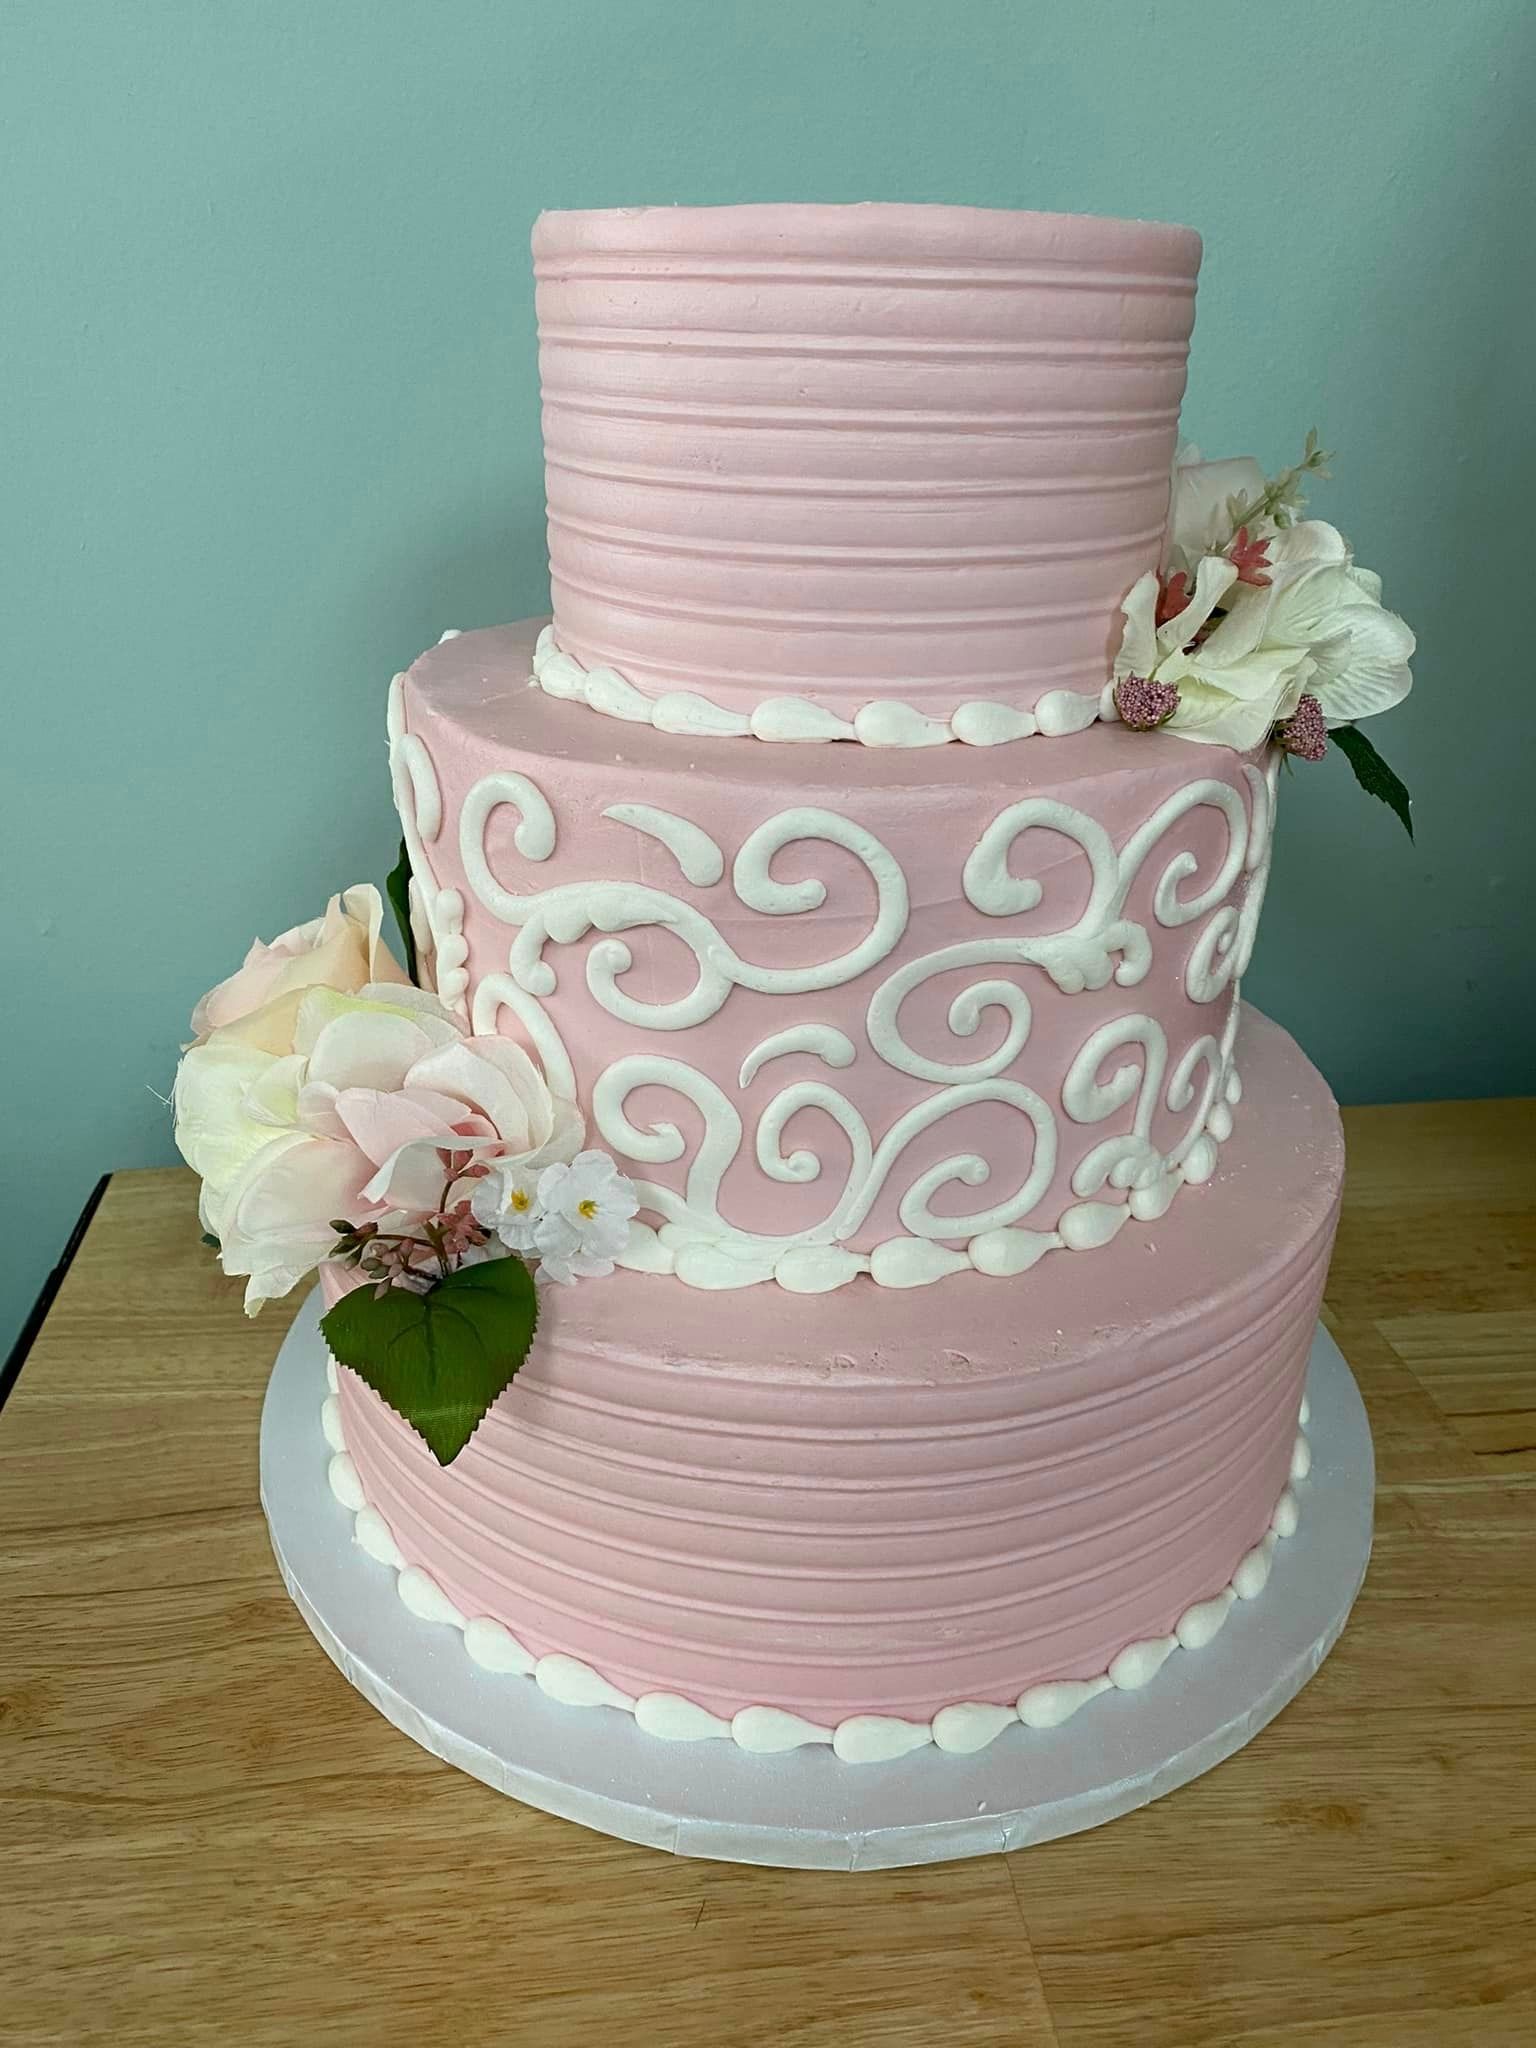 Cake with textured swirled icing, in white and pink ombre coloring